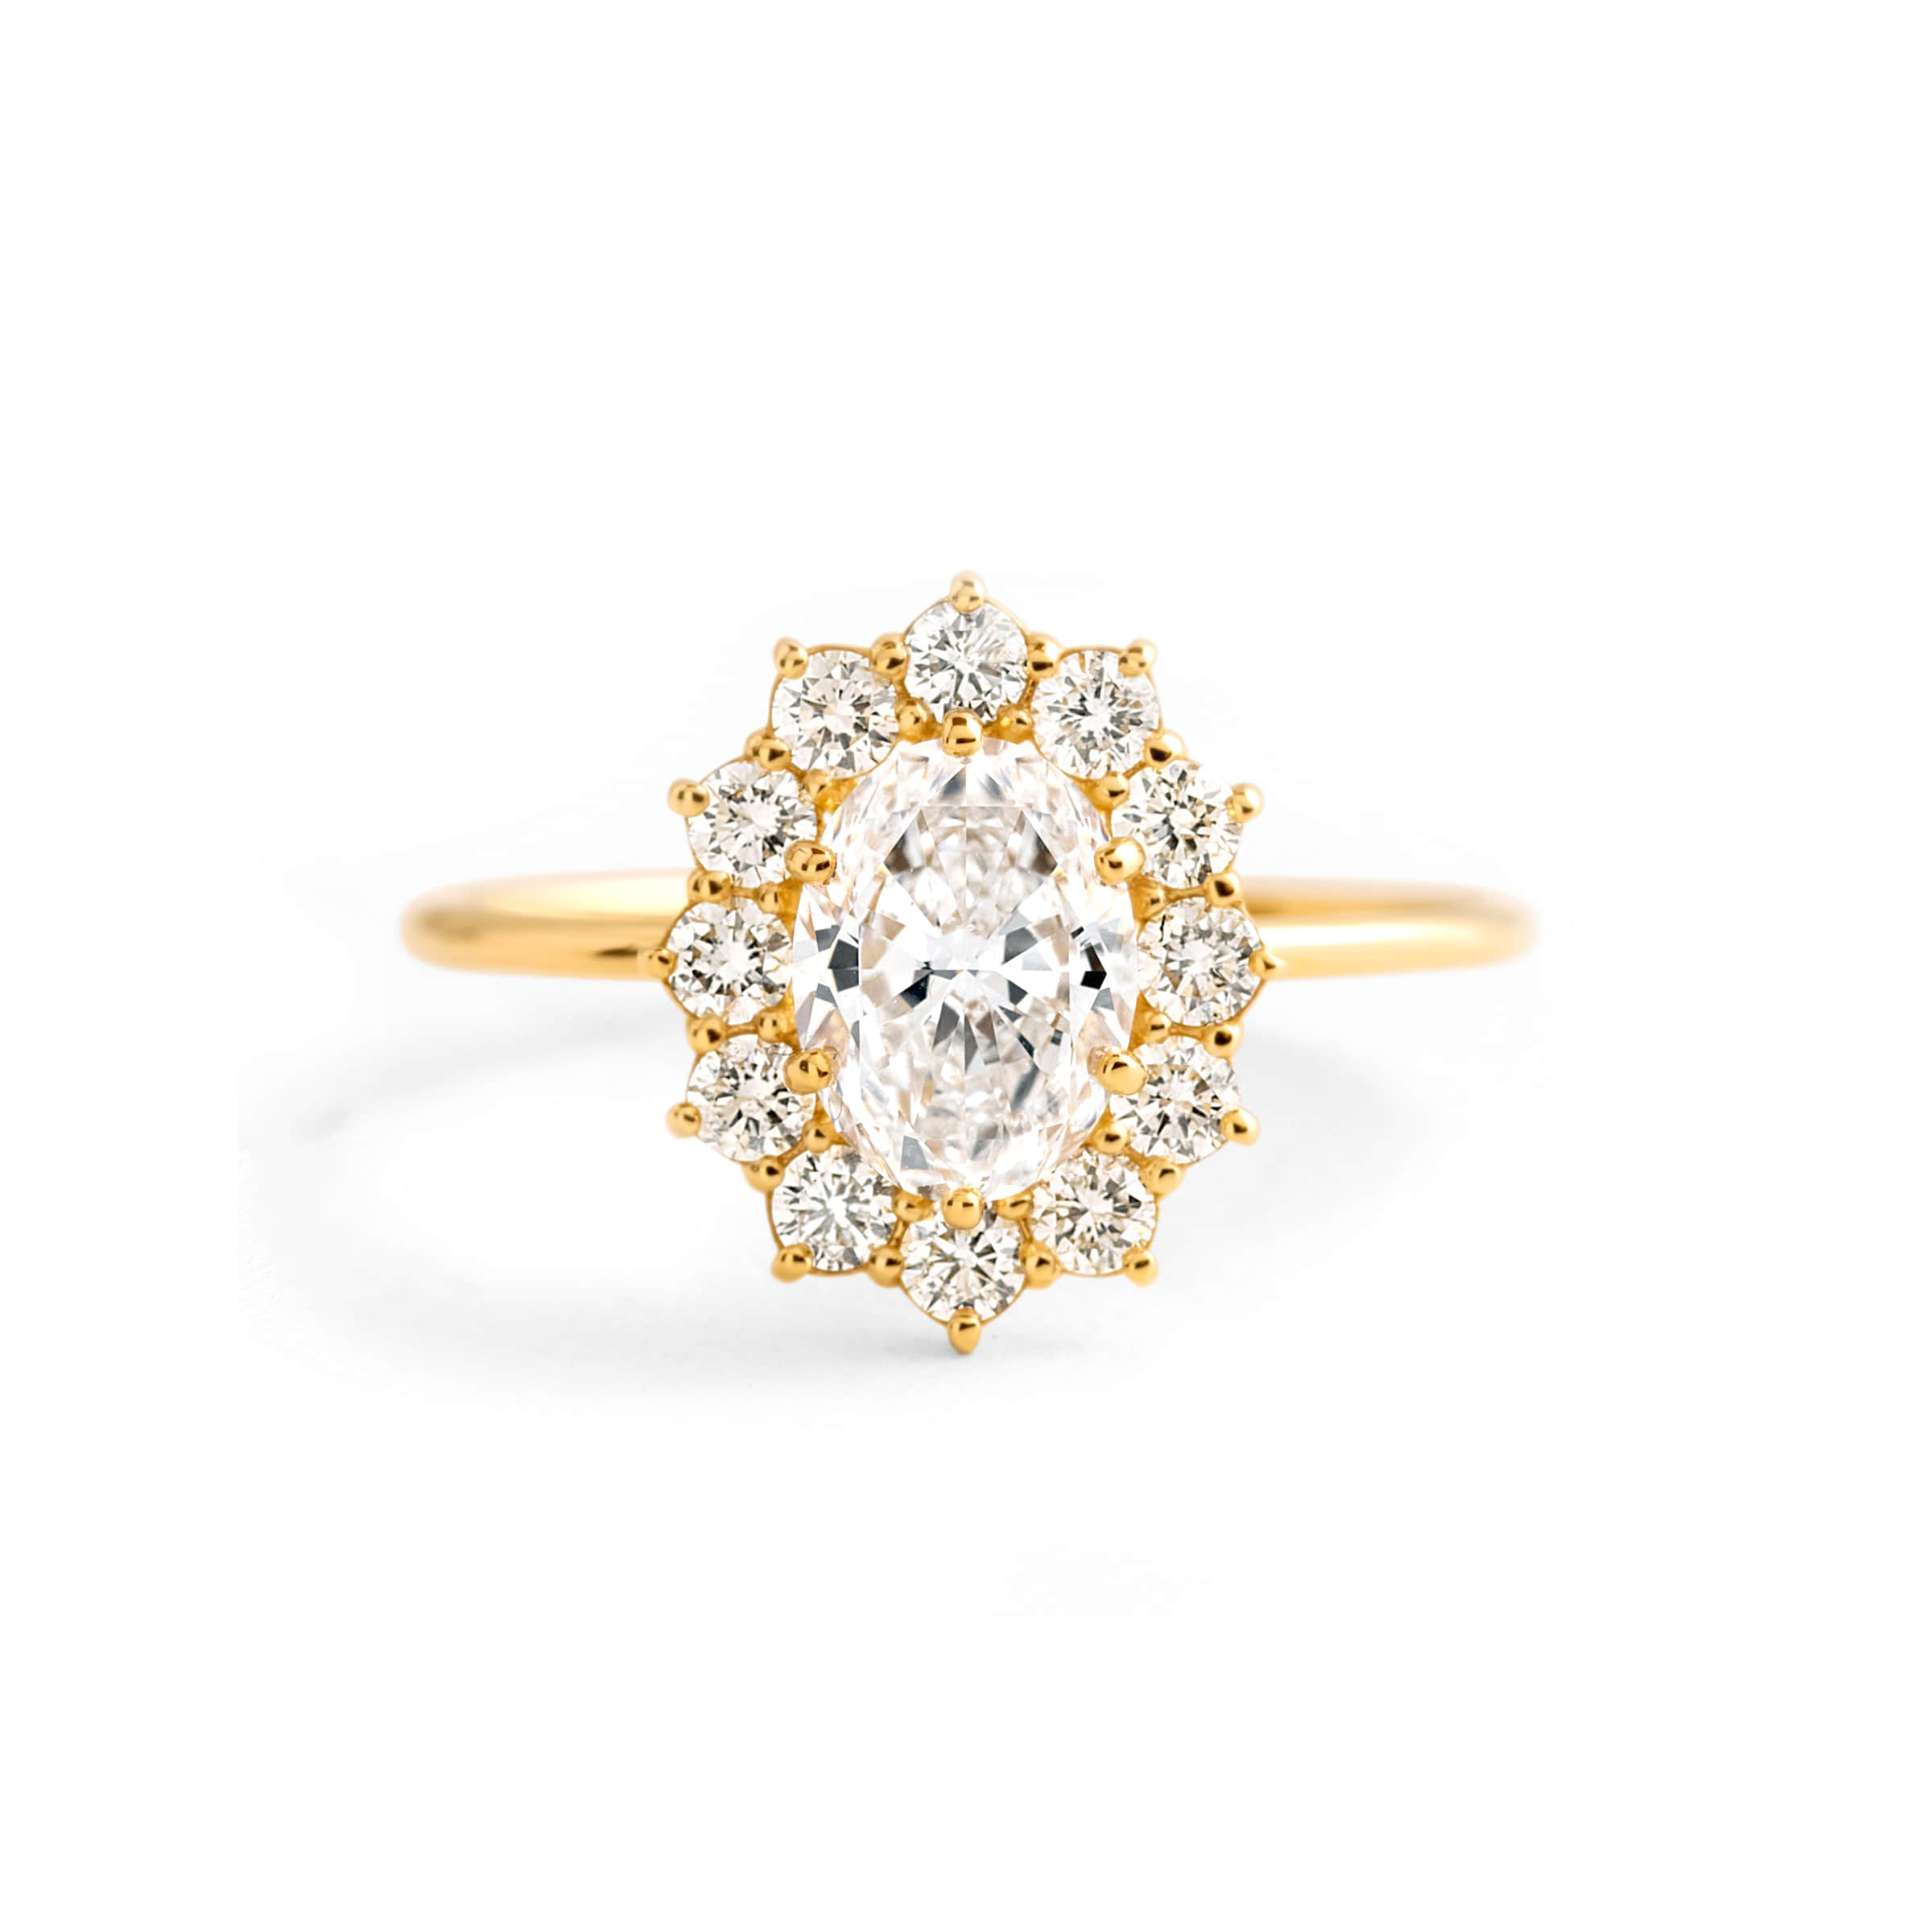 Darry Ring yellow gold promise ring